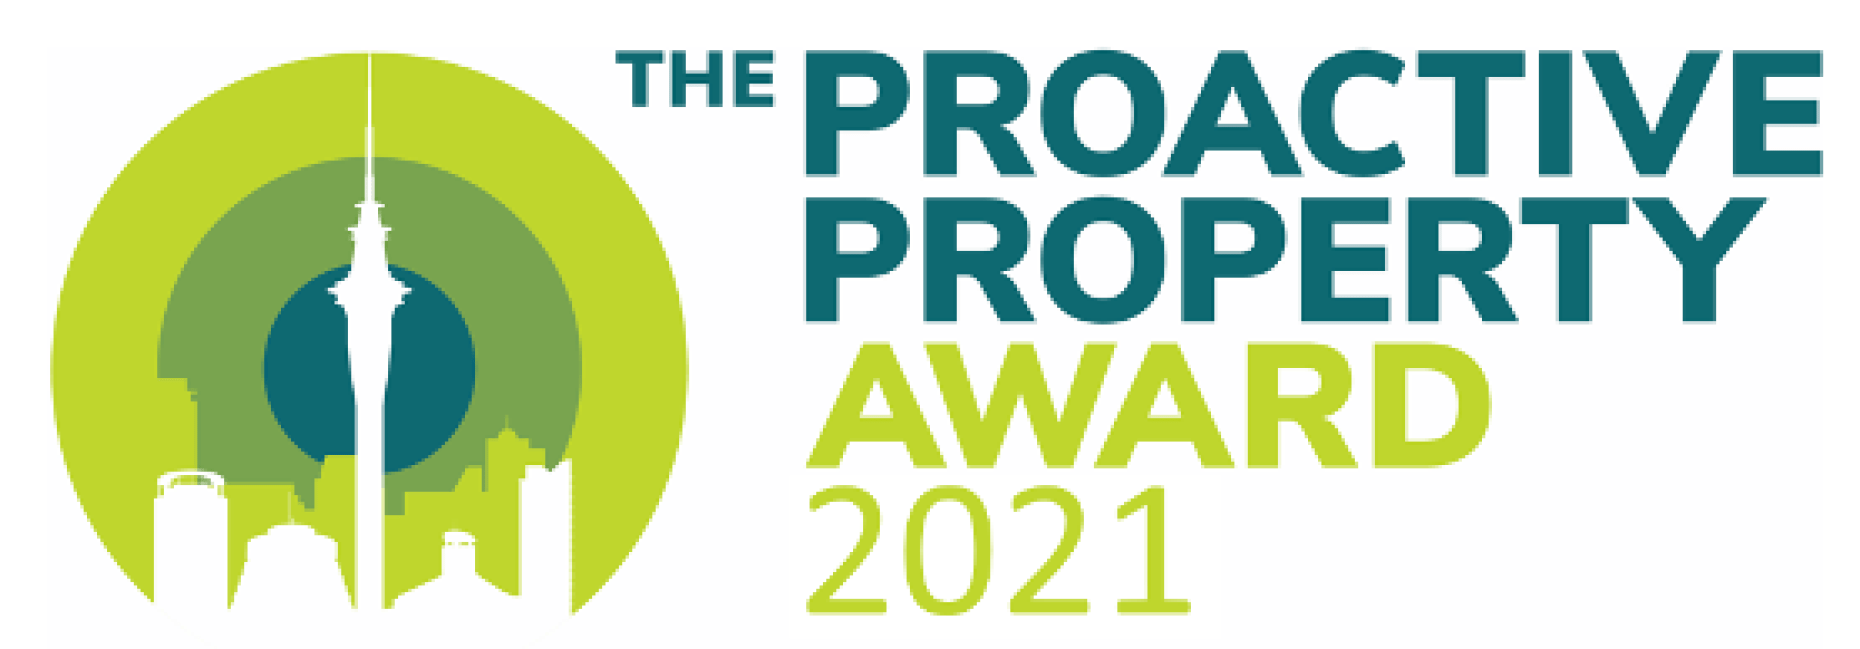 Please enter CoreNet’s Proactive Property Awards 2021 - and spread the word!